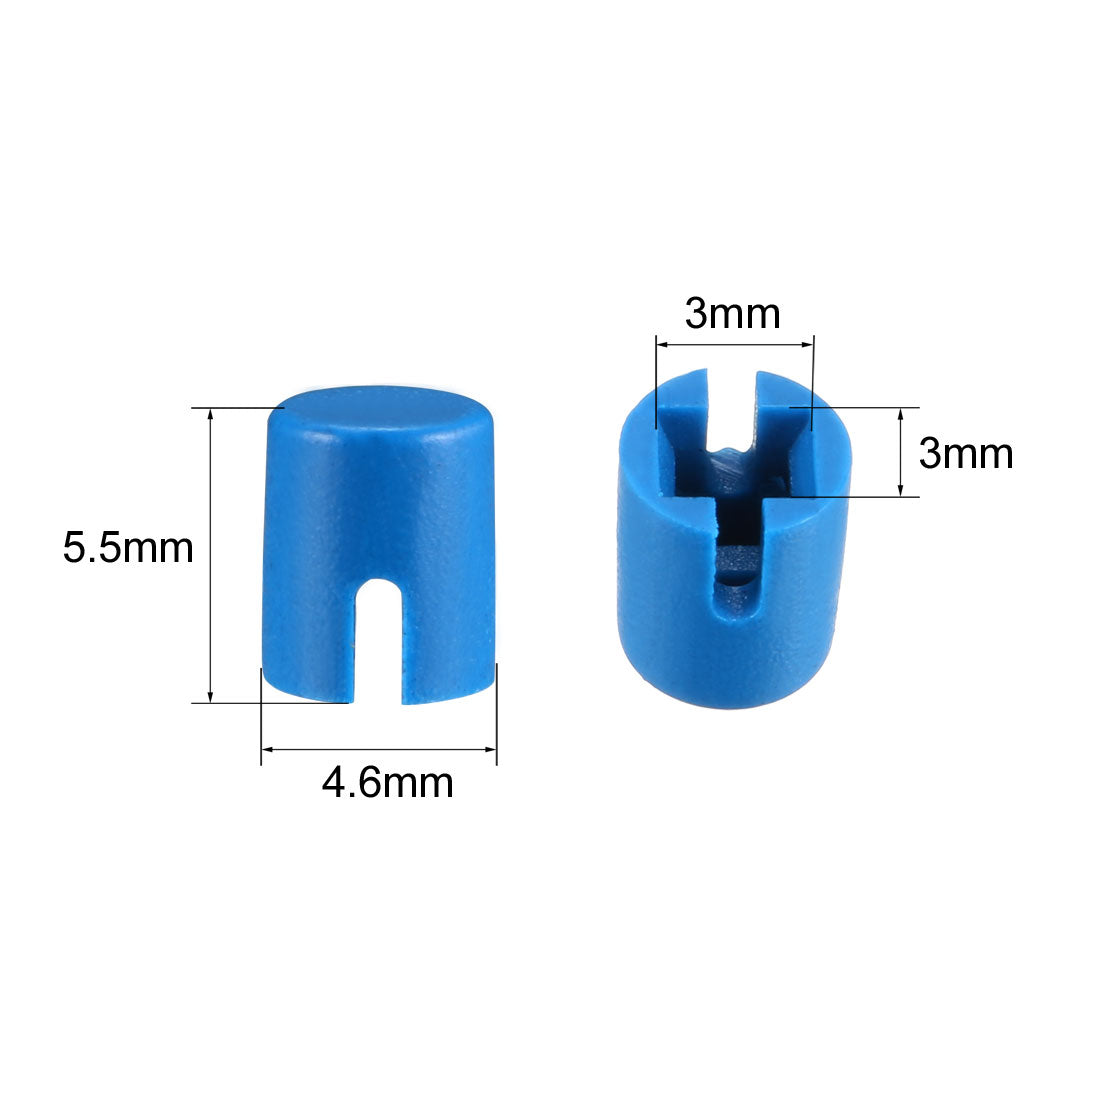 uxcell Uxcell 50Pcs Plastic 4.6x5.5mm Push Button Tactile Switch Caps Cover Keycaps Blue for 6x6x7.3mm Tact Switch